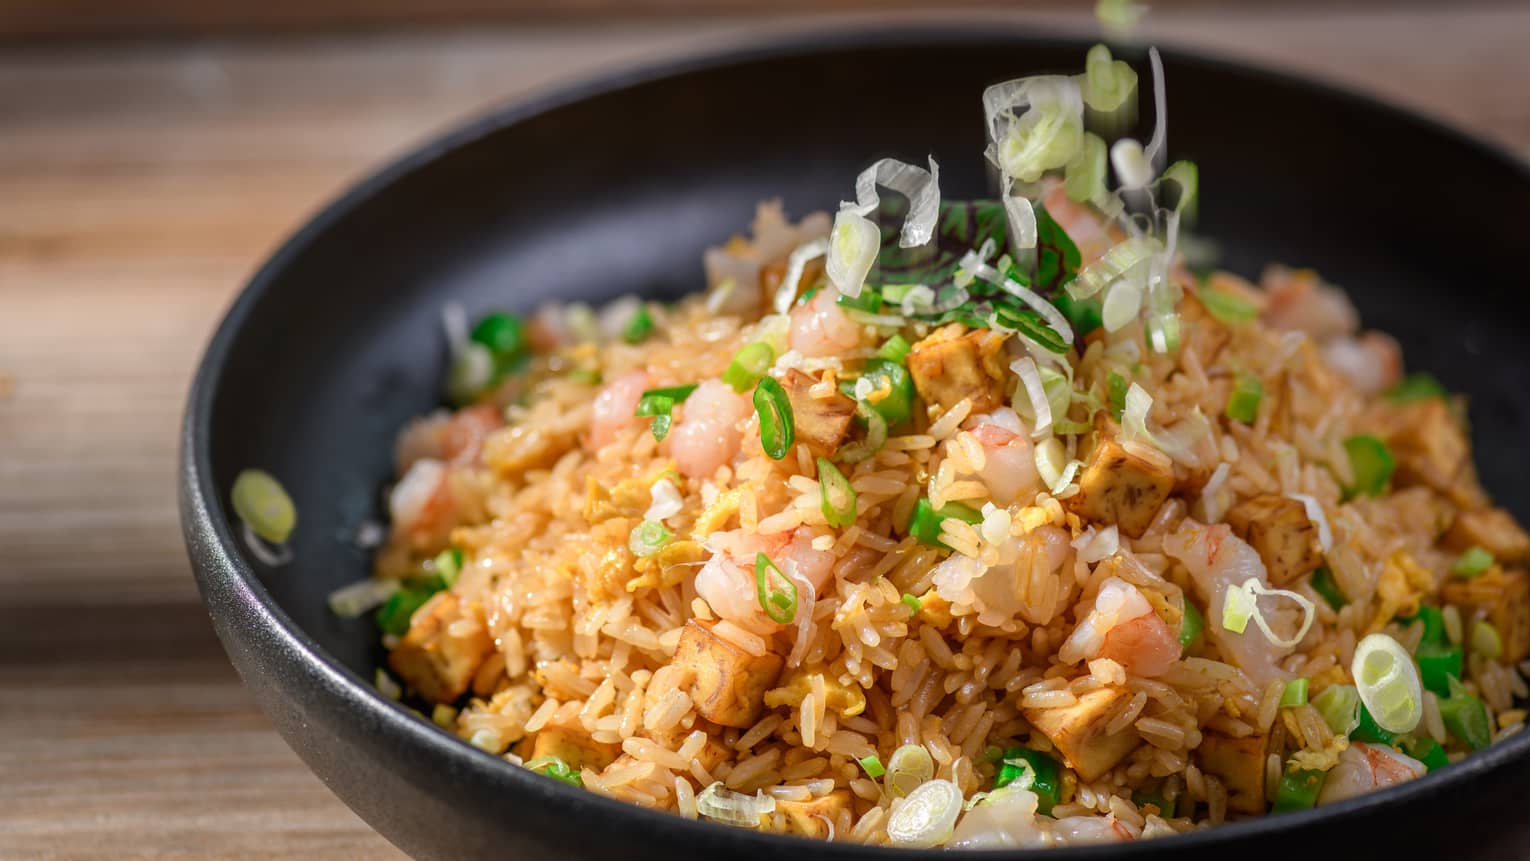 Signature fried rice with shrimp, roasted pork and chives